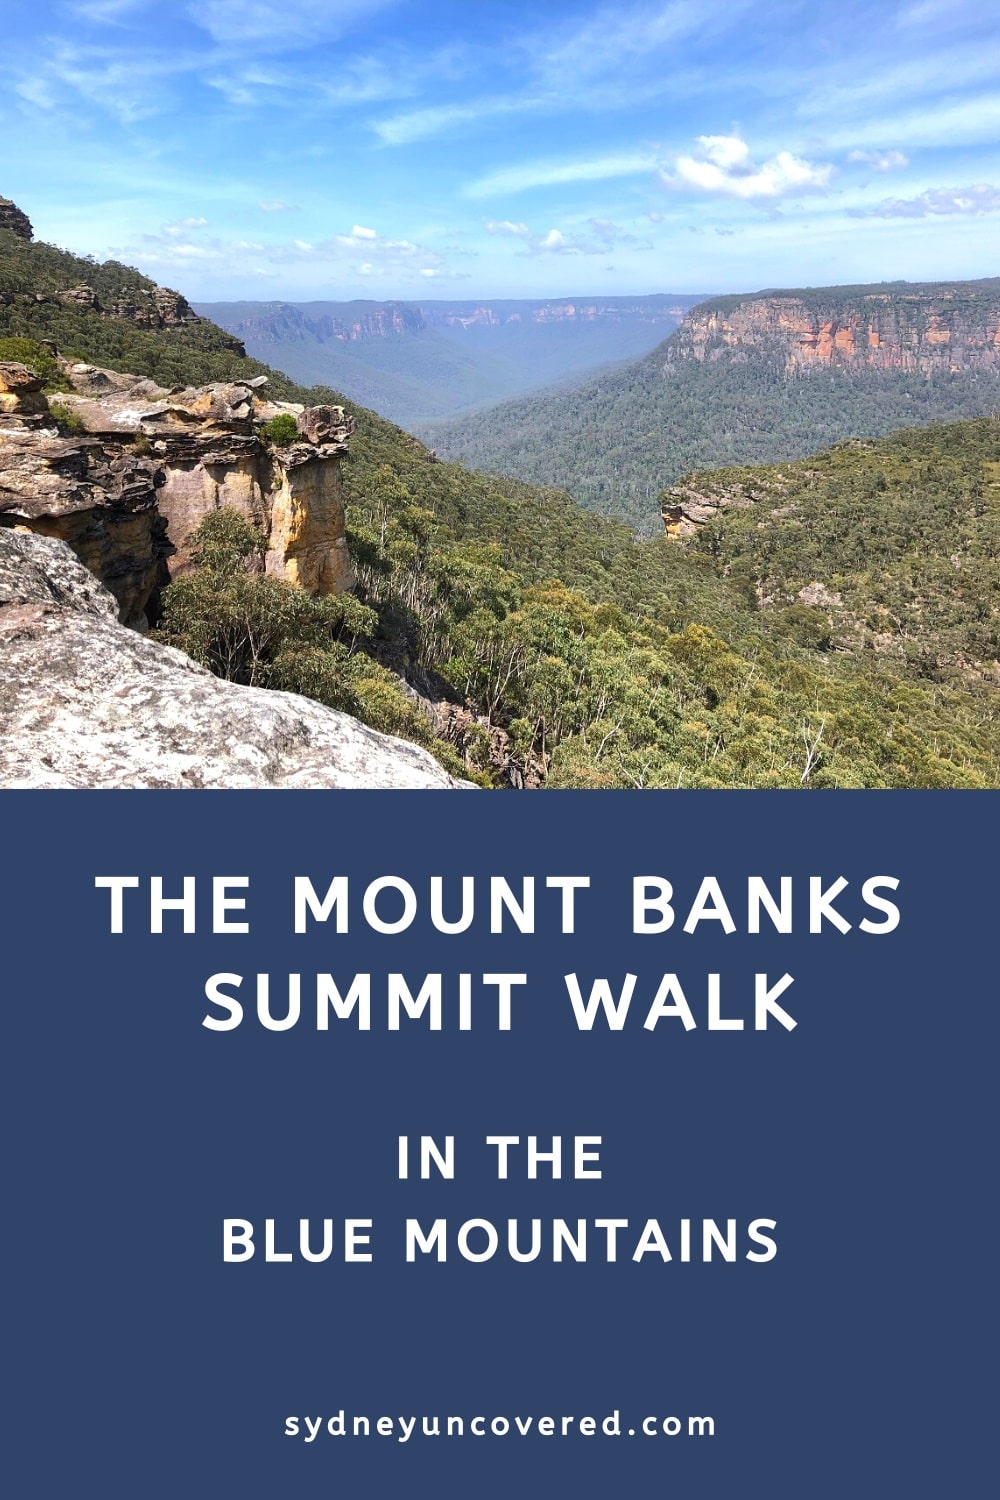 Mount Banks summit walking track in the Blue Mountains